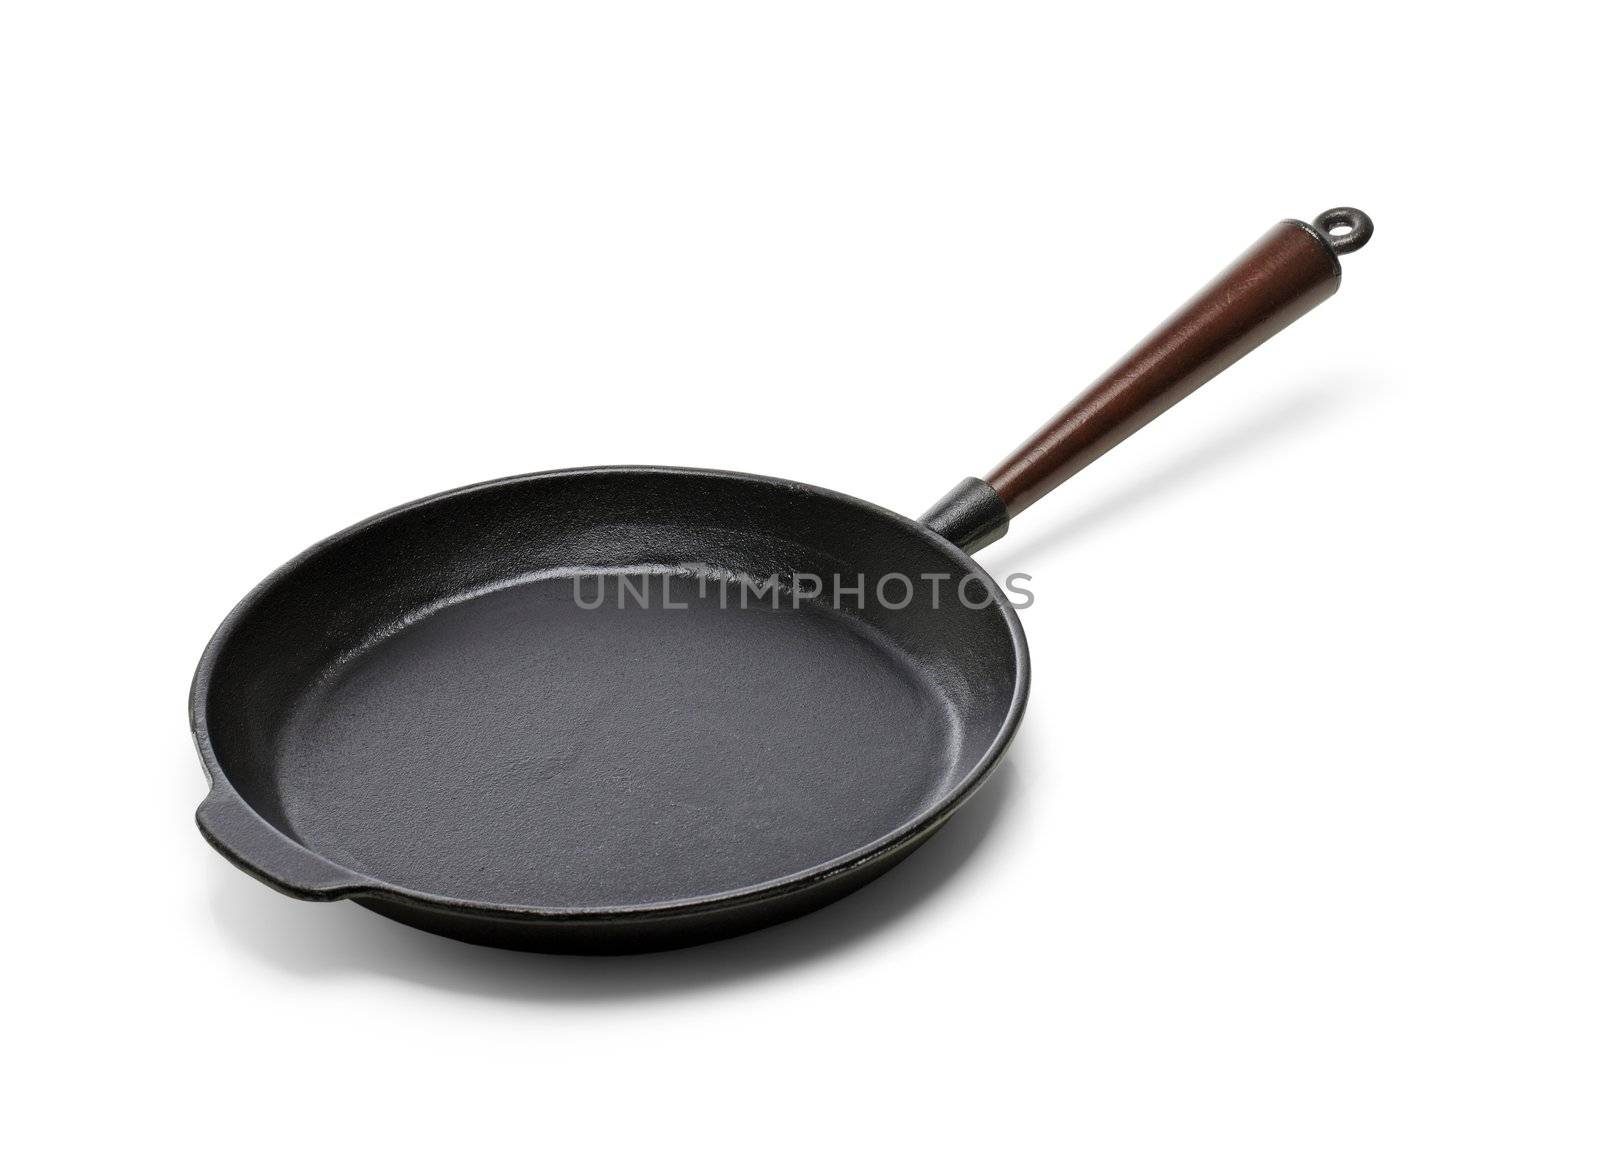 Frying pan by Stocksnapper